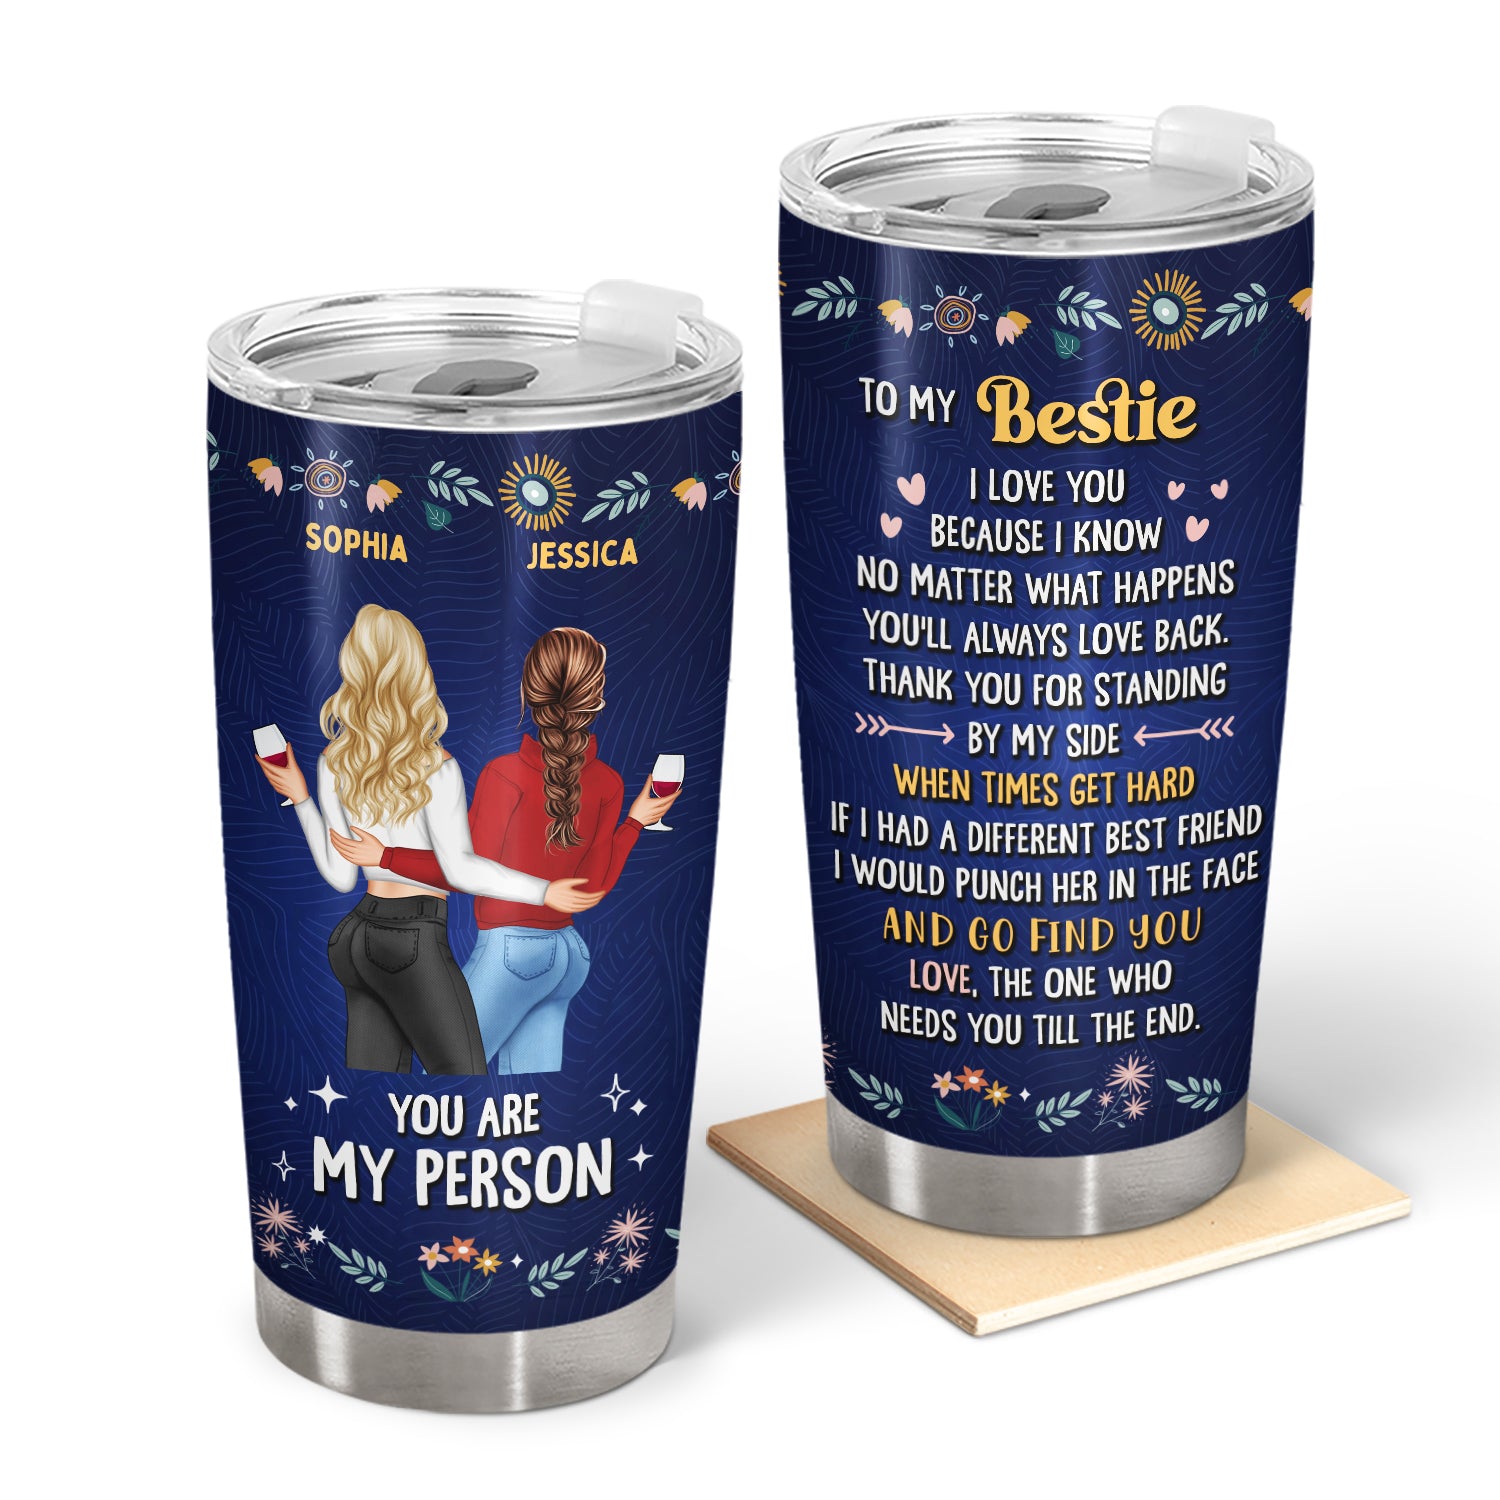 You Are My Person I Love You Because I Know - Holiday, Birthday, Loving Gift For Bestie, Sister, Colleague - Personalized Tumbler